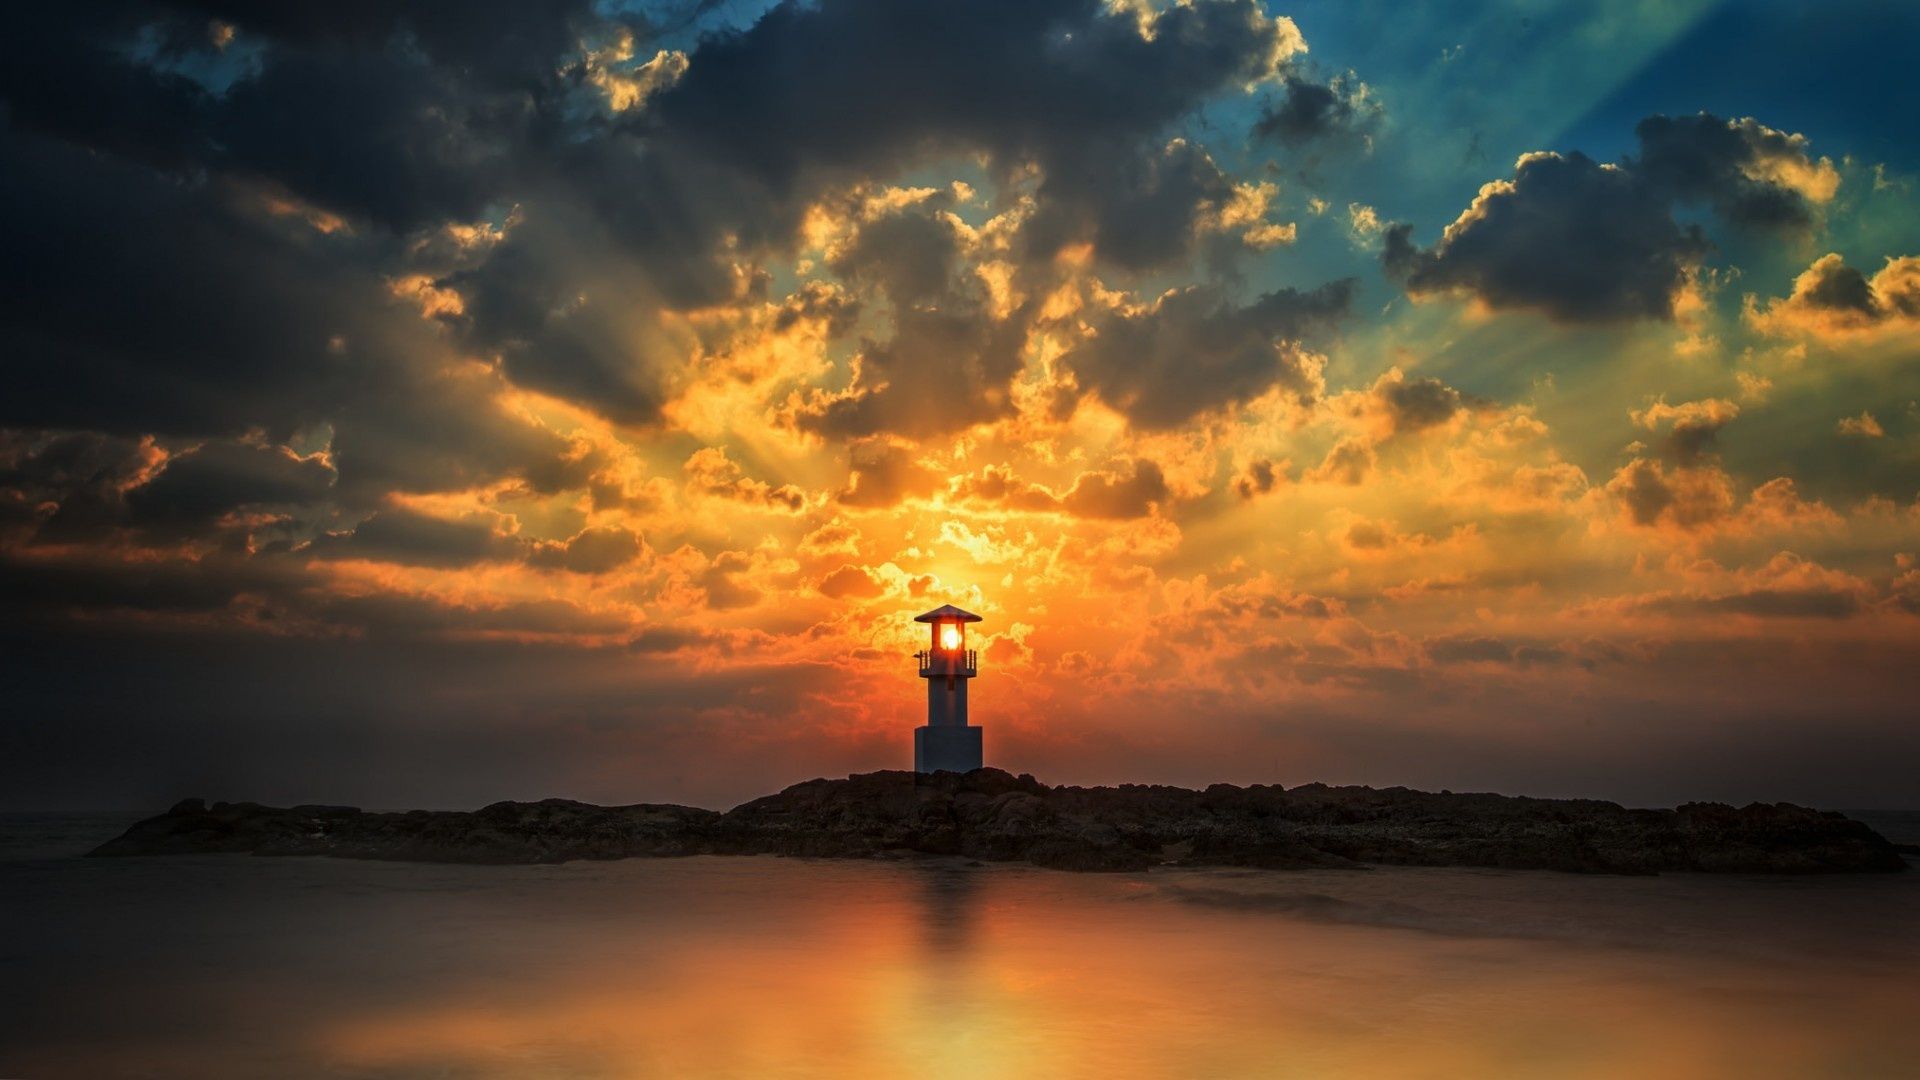 Lighthouse in the Sunset HD Wallpaper. Background Image